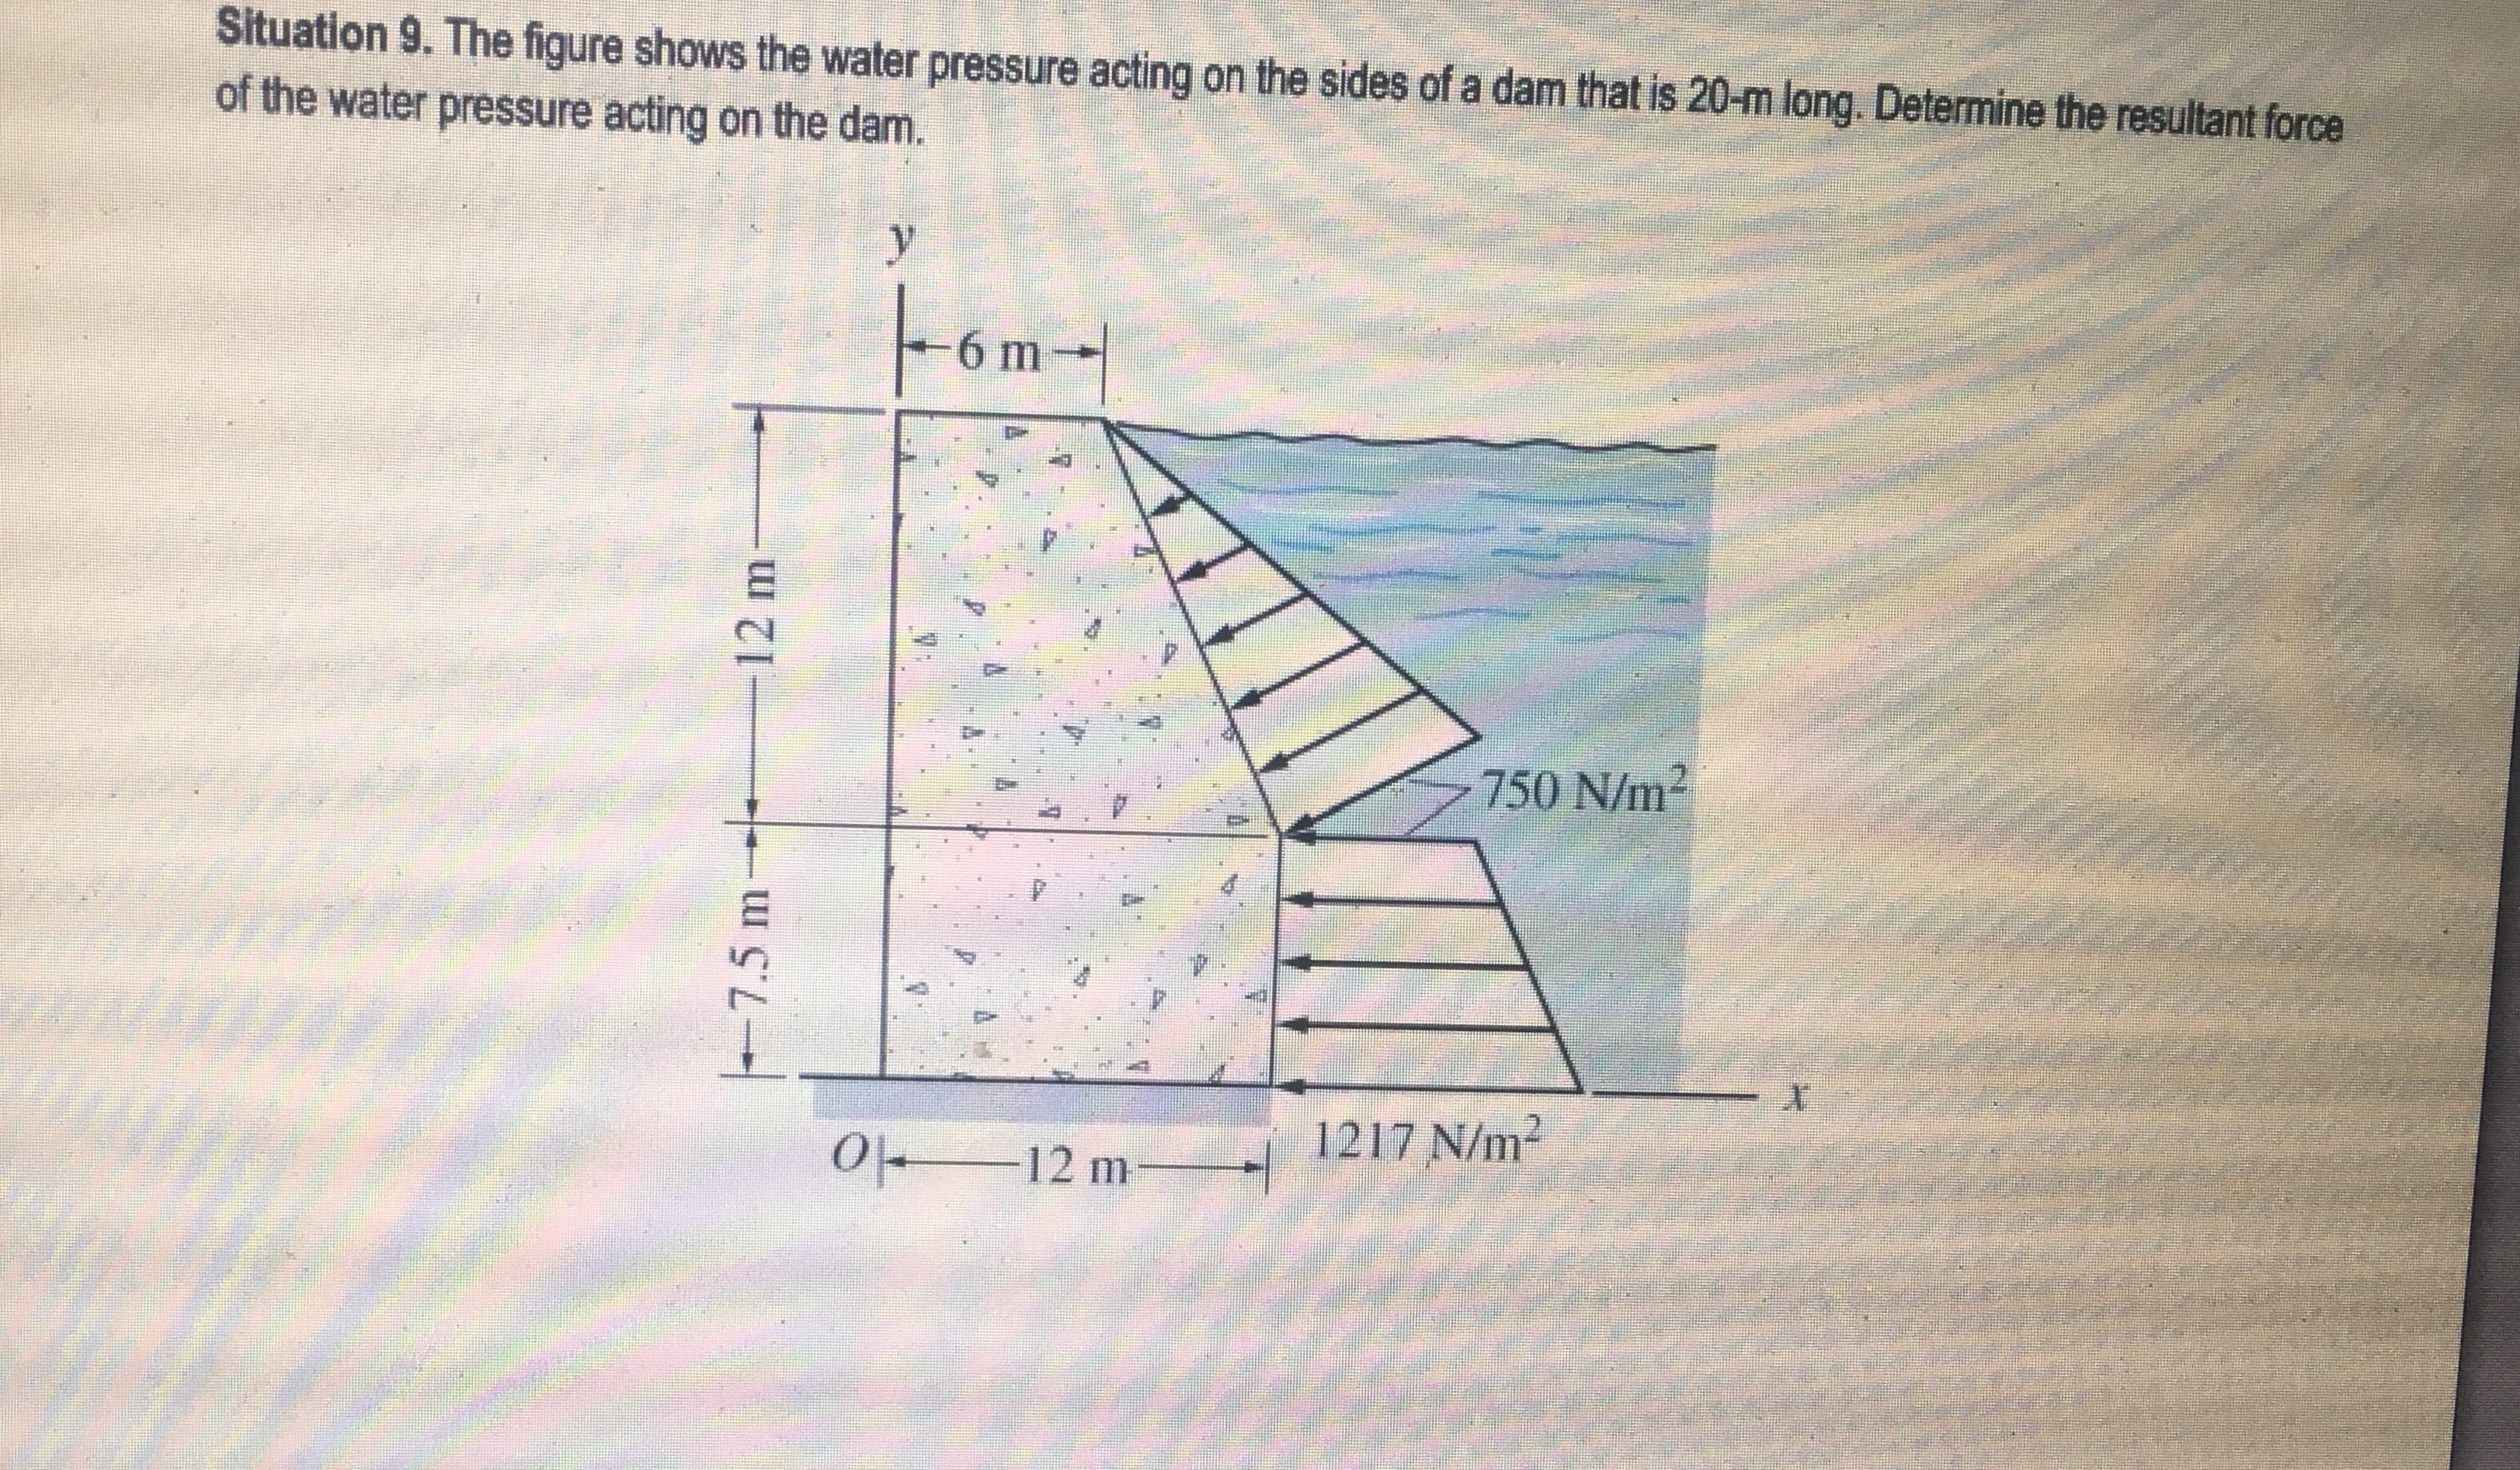 Situation 9. The figure shows the water pressure acting on the sides of a dam that is 20-m long. Determine the resultant force
of the water pressure acting on the dam.
